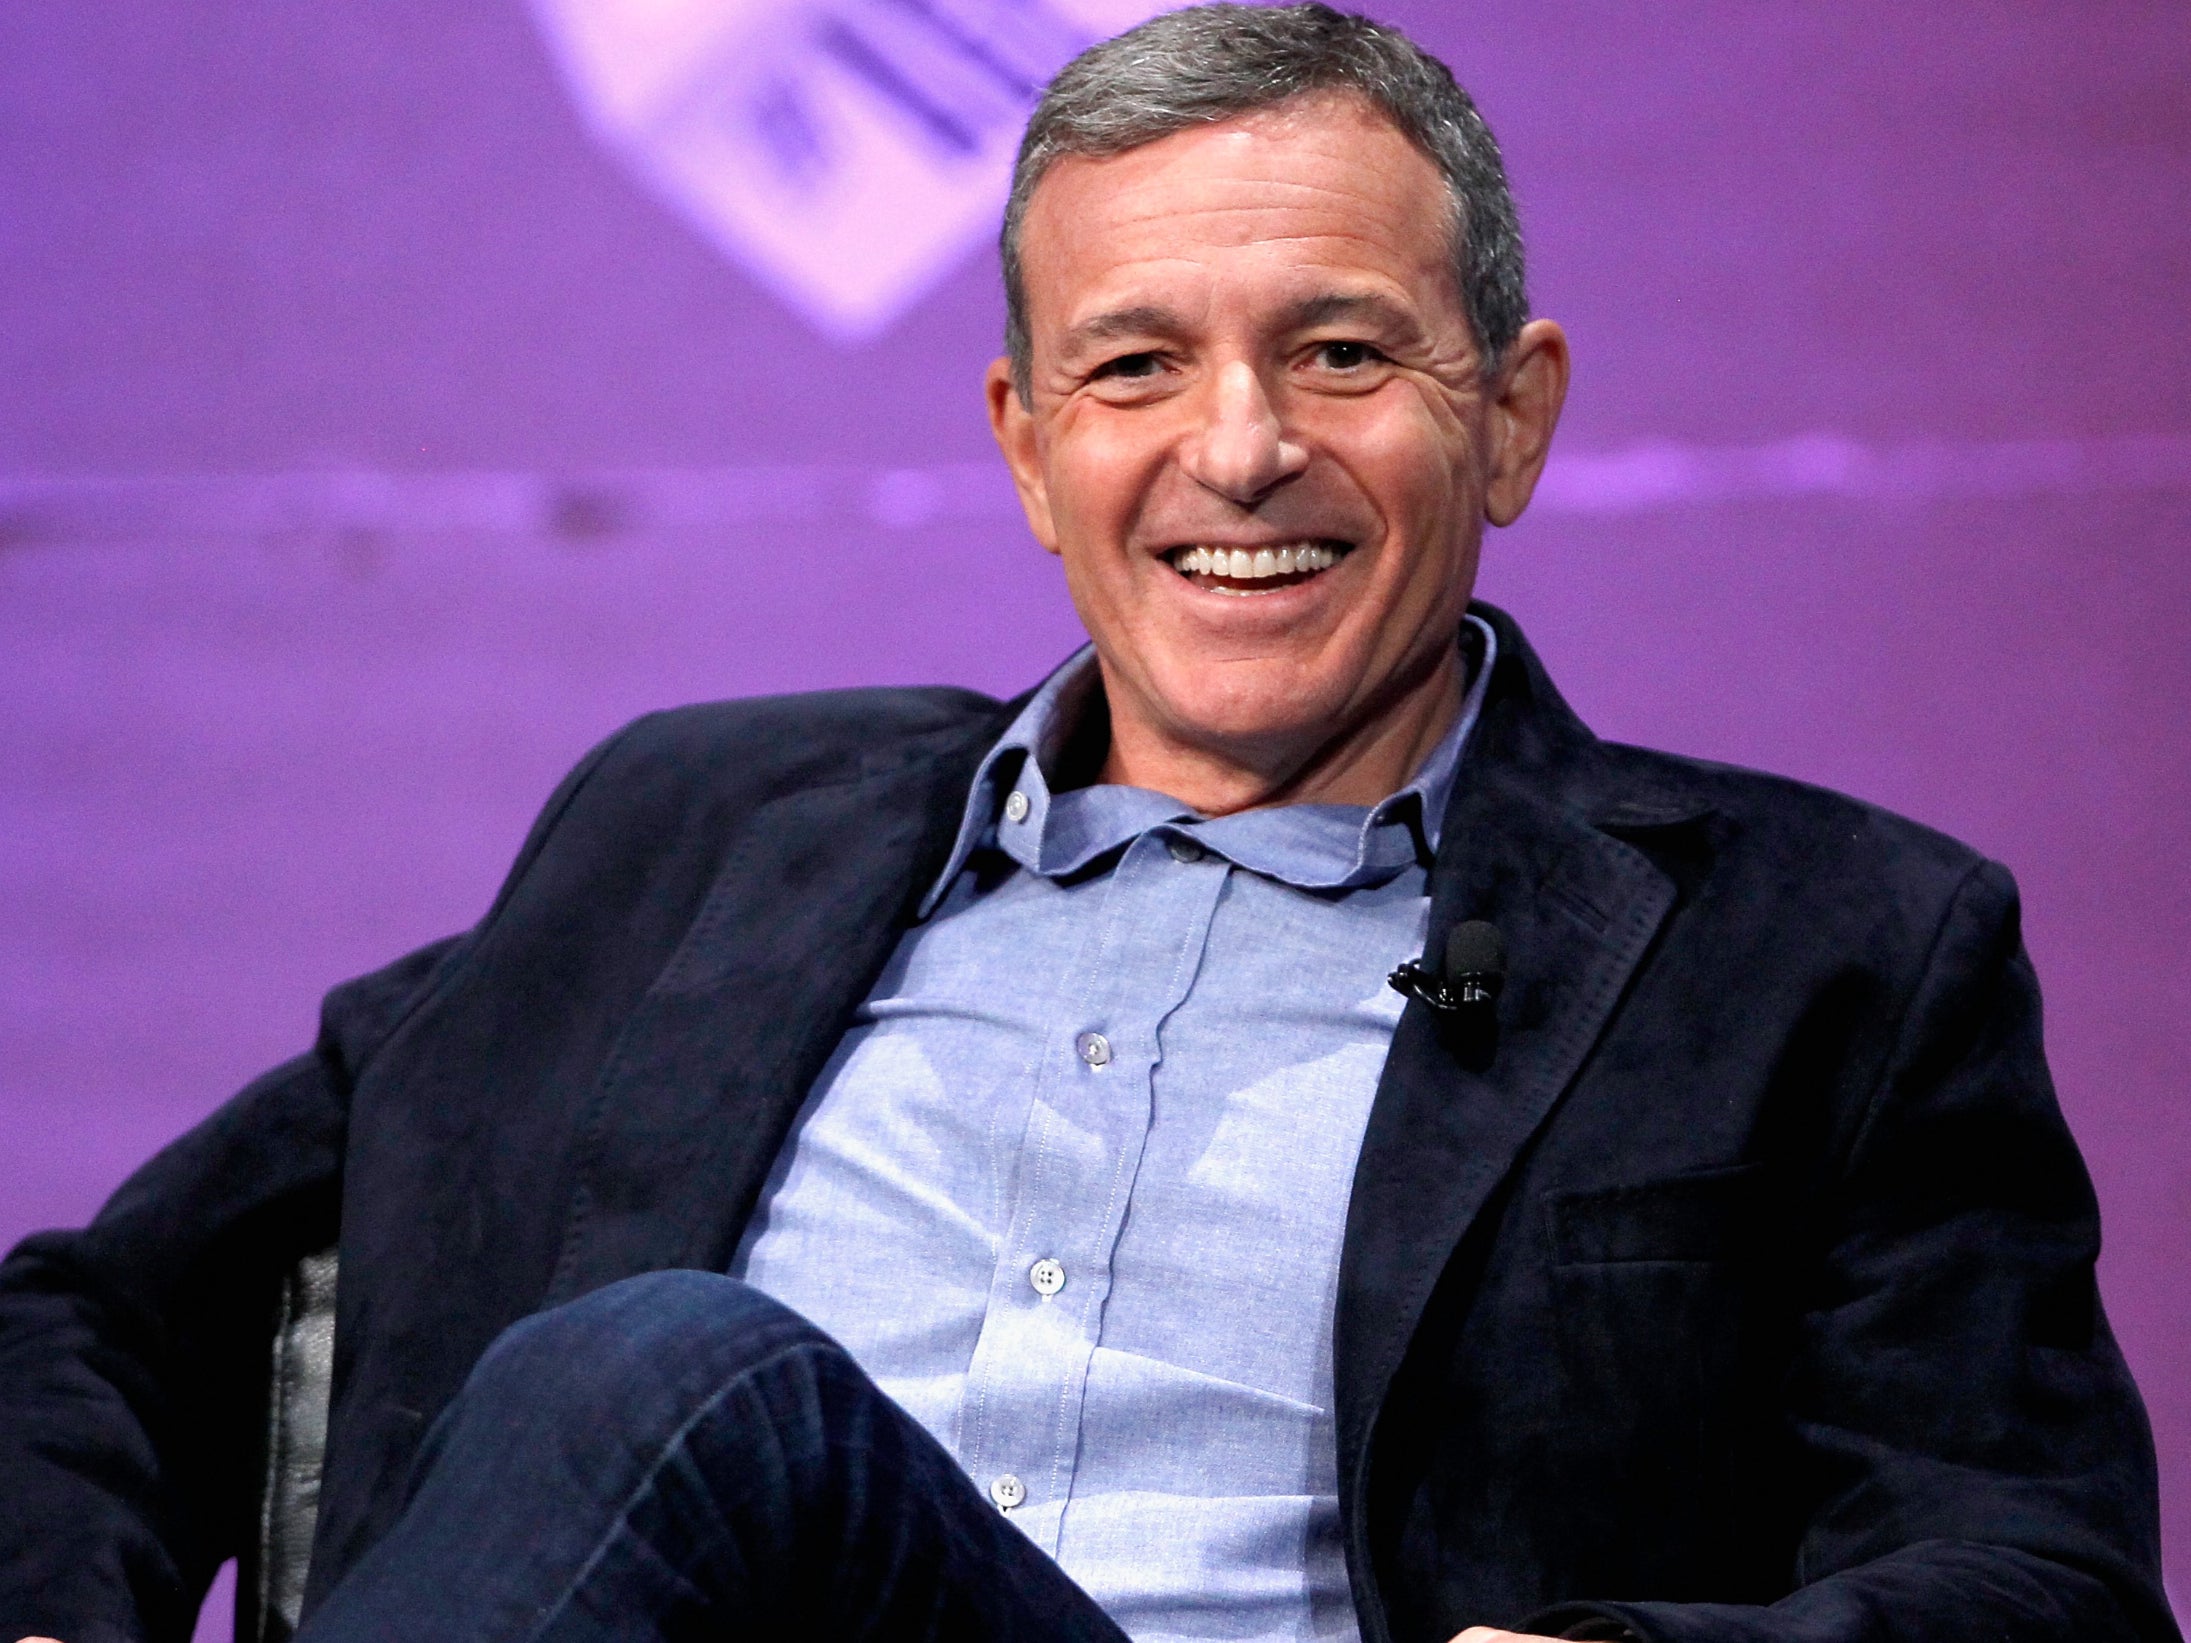 Disney CEO Bob Iger says he’d consider a position in Biden administration if asked